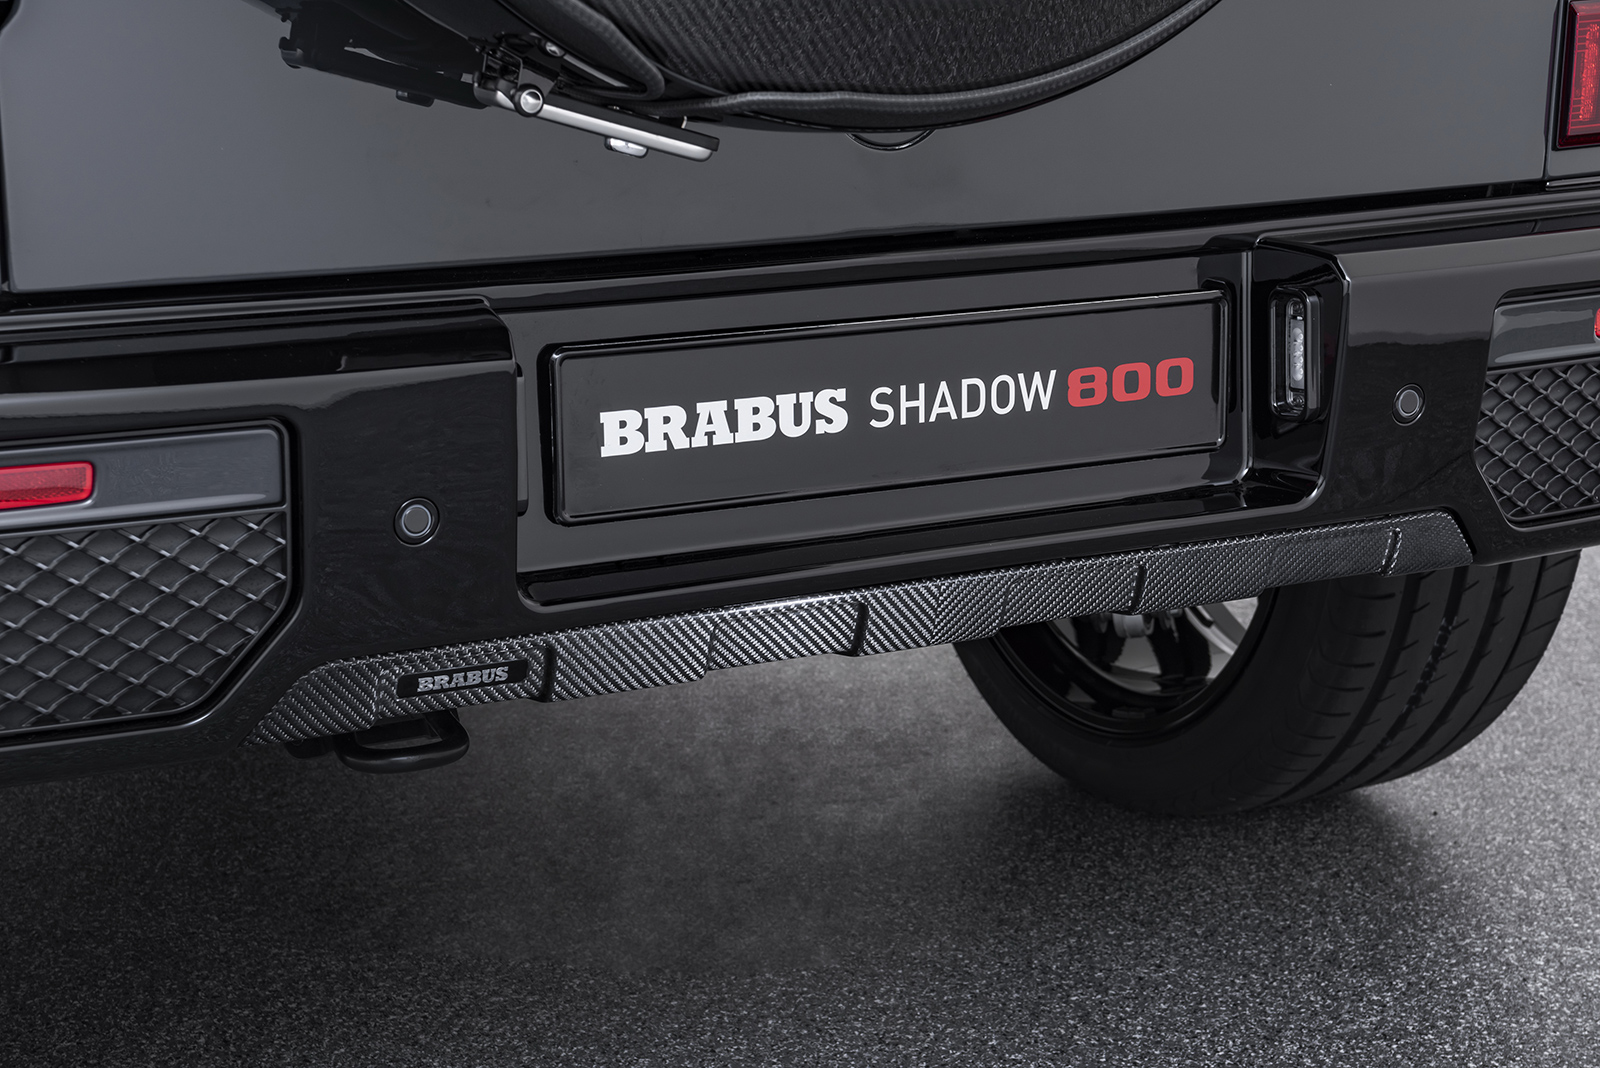 Check price and buy Brabus carbon body kit for Mercedes G-class W463A